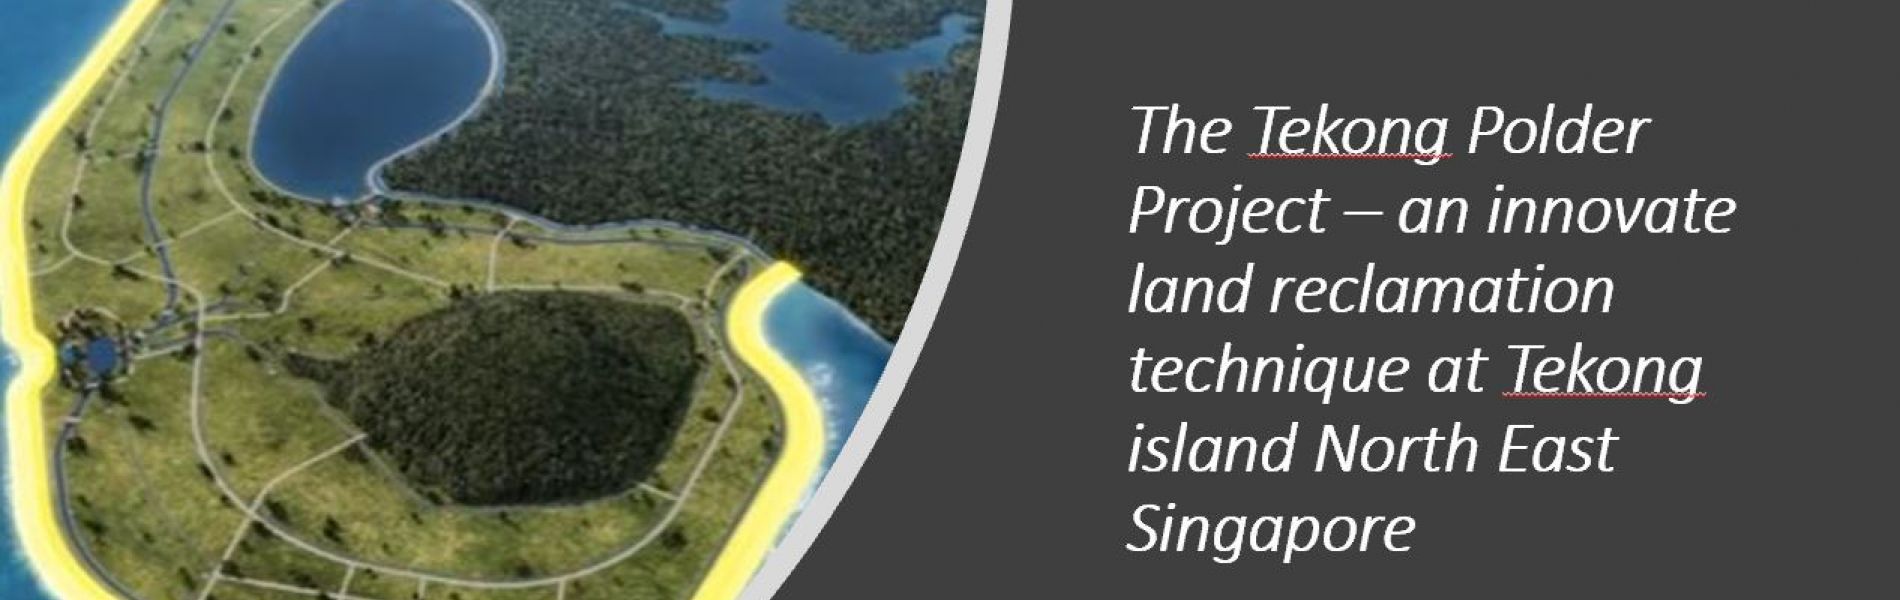 The Tekong Polder Project – an innovate land reclamation technique at Tekong island North East Singapore